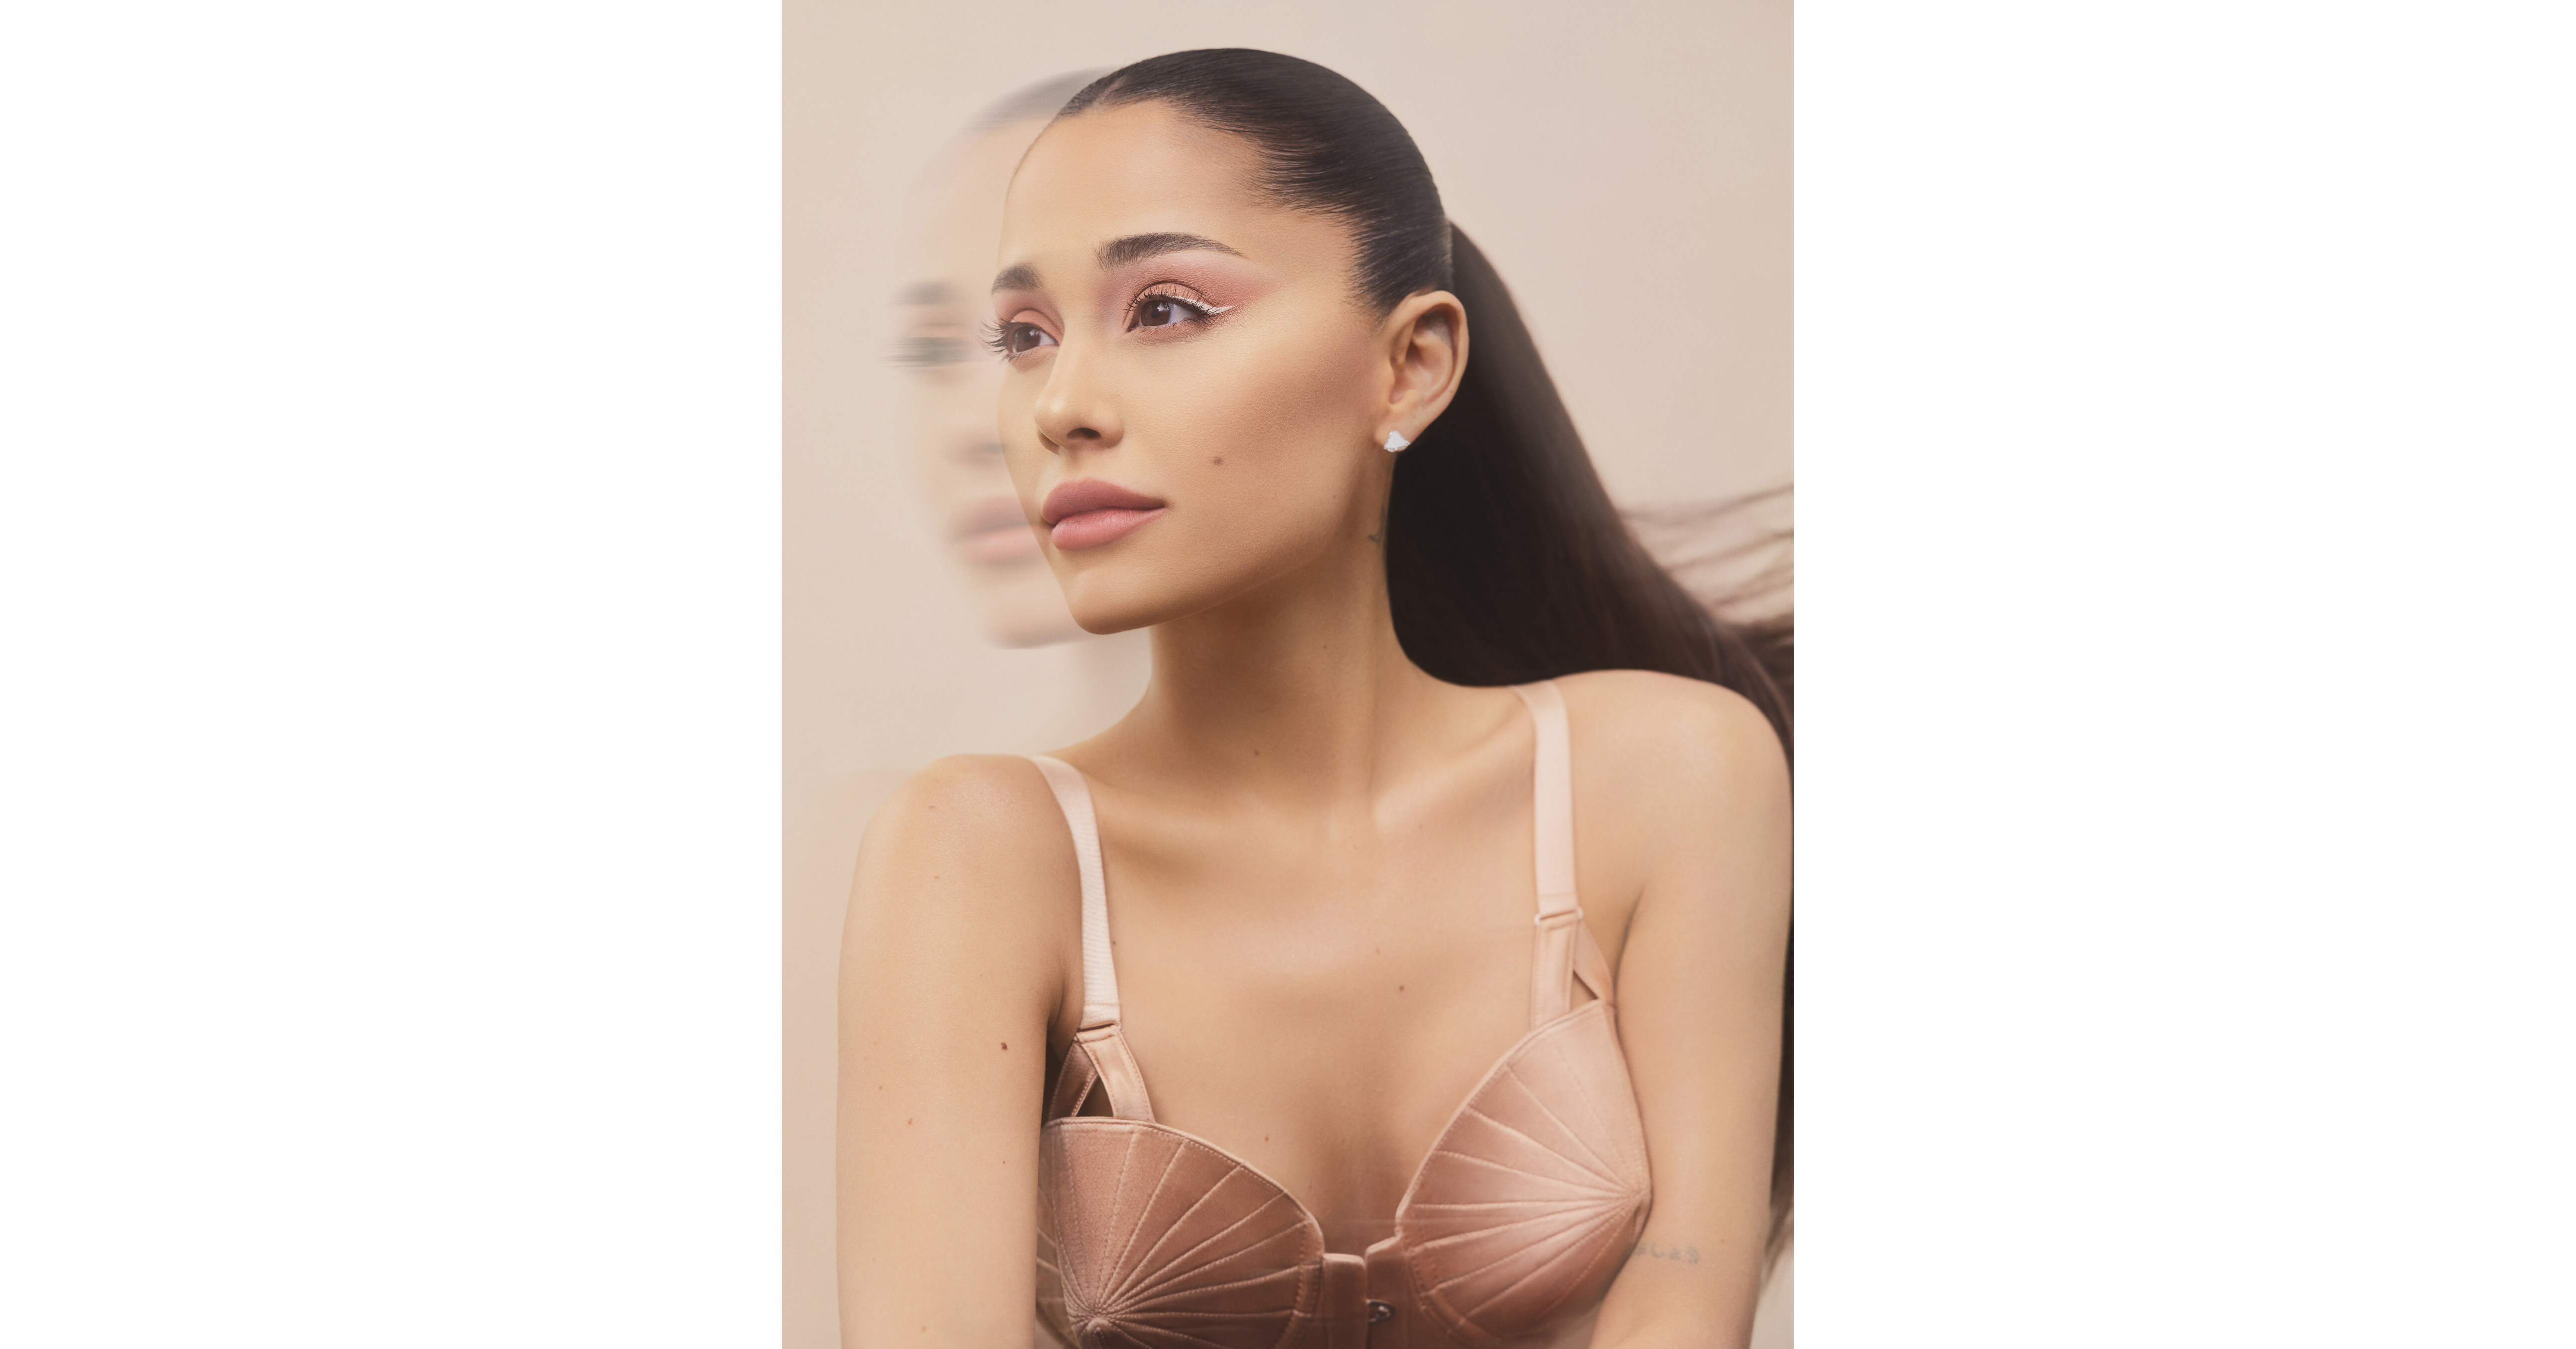 Ariana Grande's Beauty Line r.e.m. beauty Has Launched. Here Are the  Exclusive Details